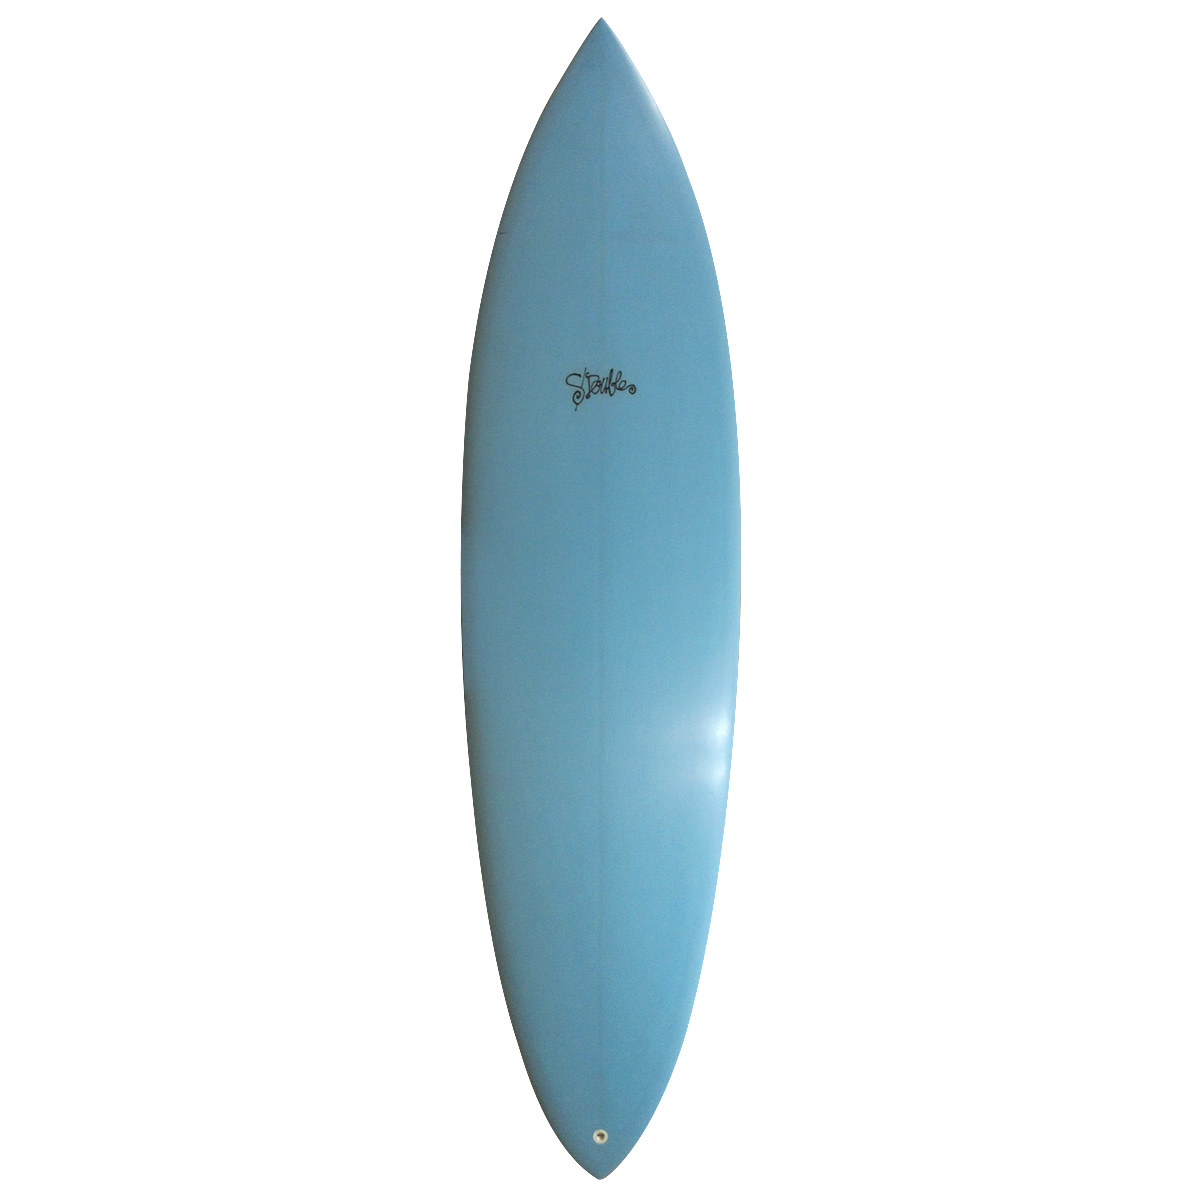 S.DOUBLE / Single Fin 7`0 Shaped By Shawn Stussy